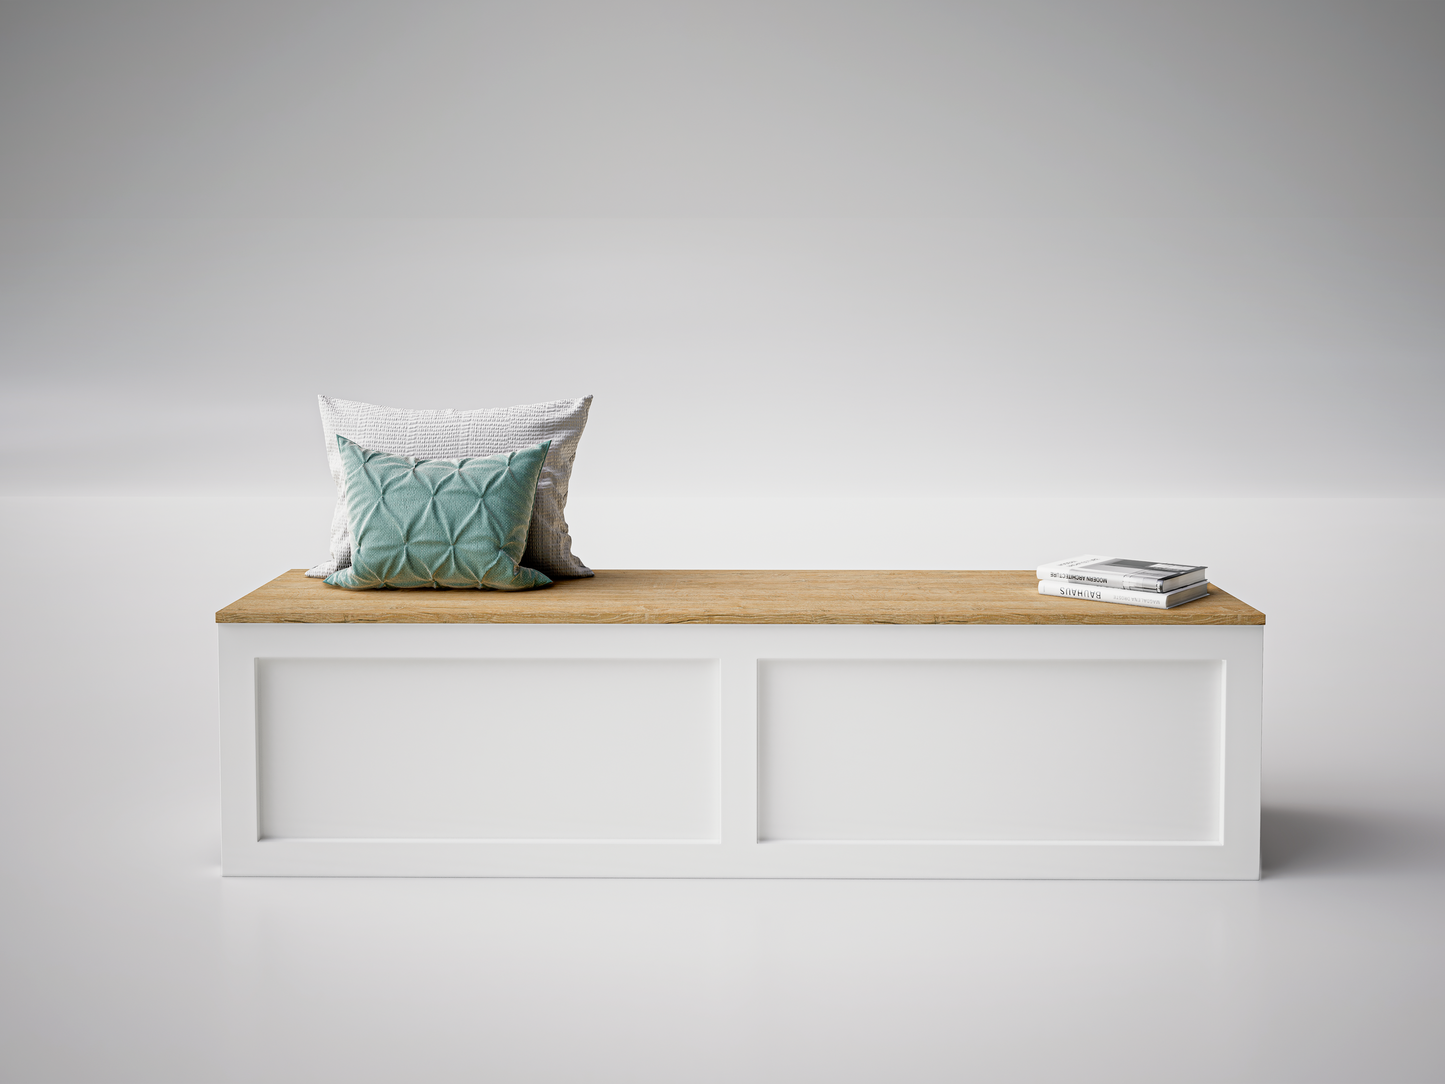 solid wood, this bench features a timeless design that adds a touch of elegance to any room. With its simple and classic shaker style design, this bench is a versatile and functional addition to your home. Use it as extra seating or as a decorative item to enhance the beauty and comfort of your living space. Order now and enjoy the perfect blend of style and practicality.